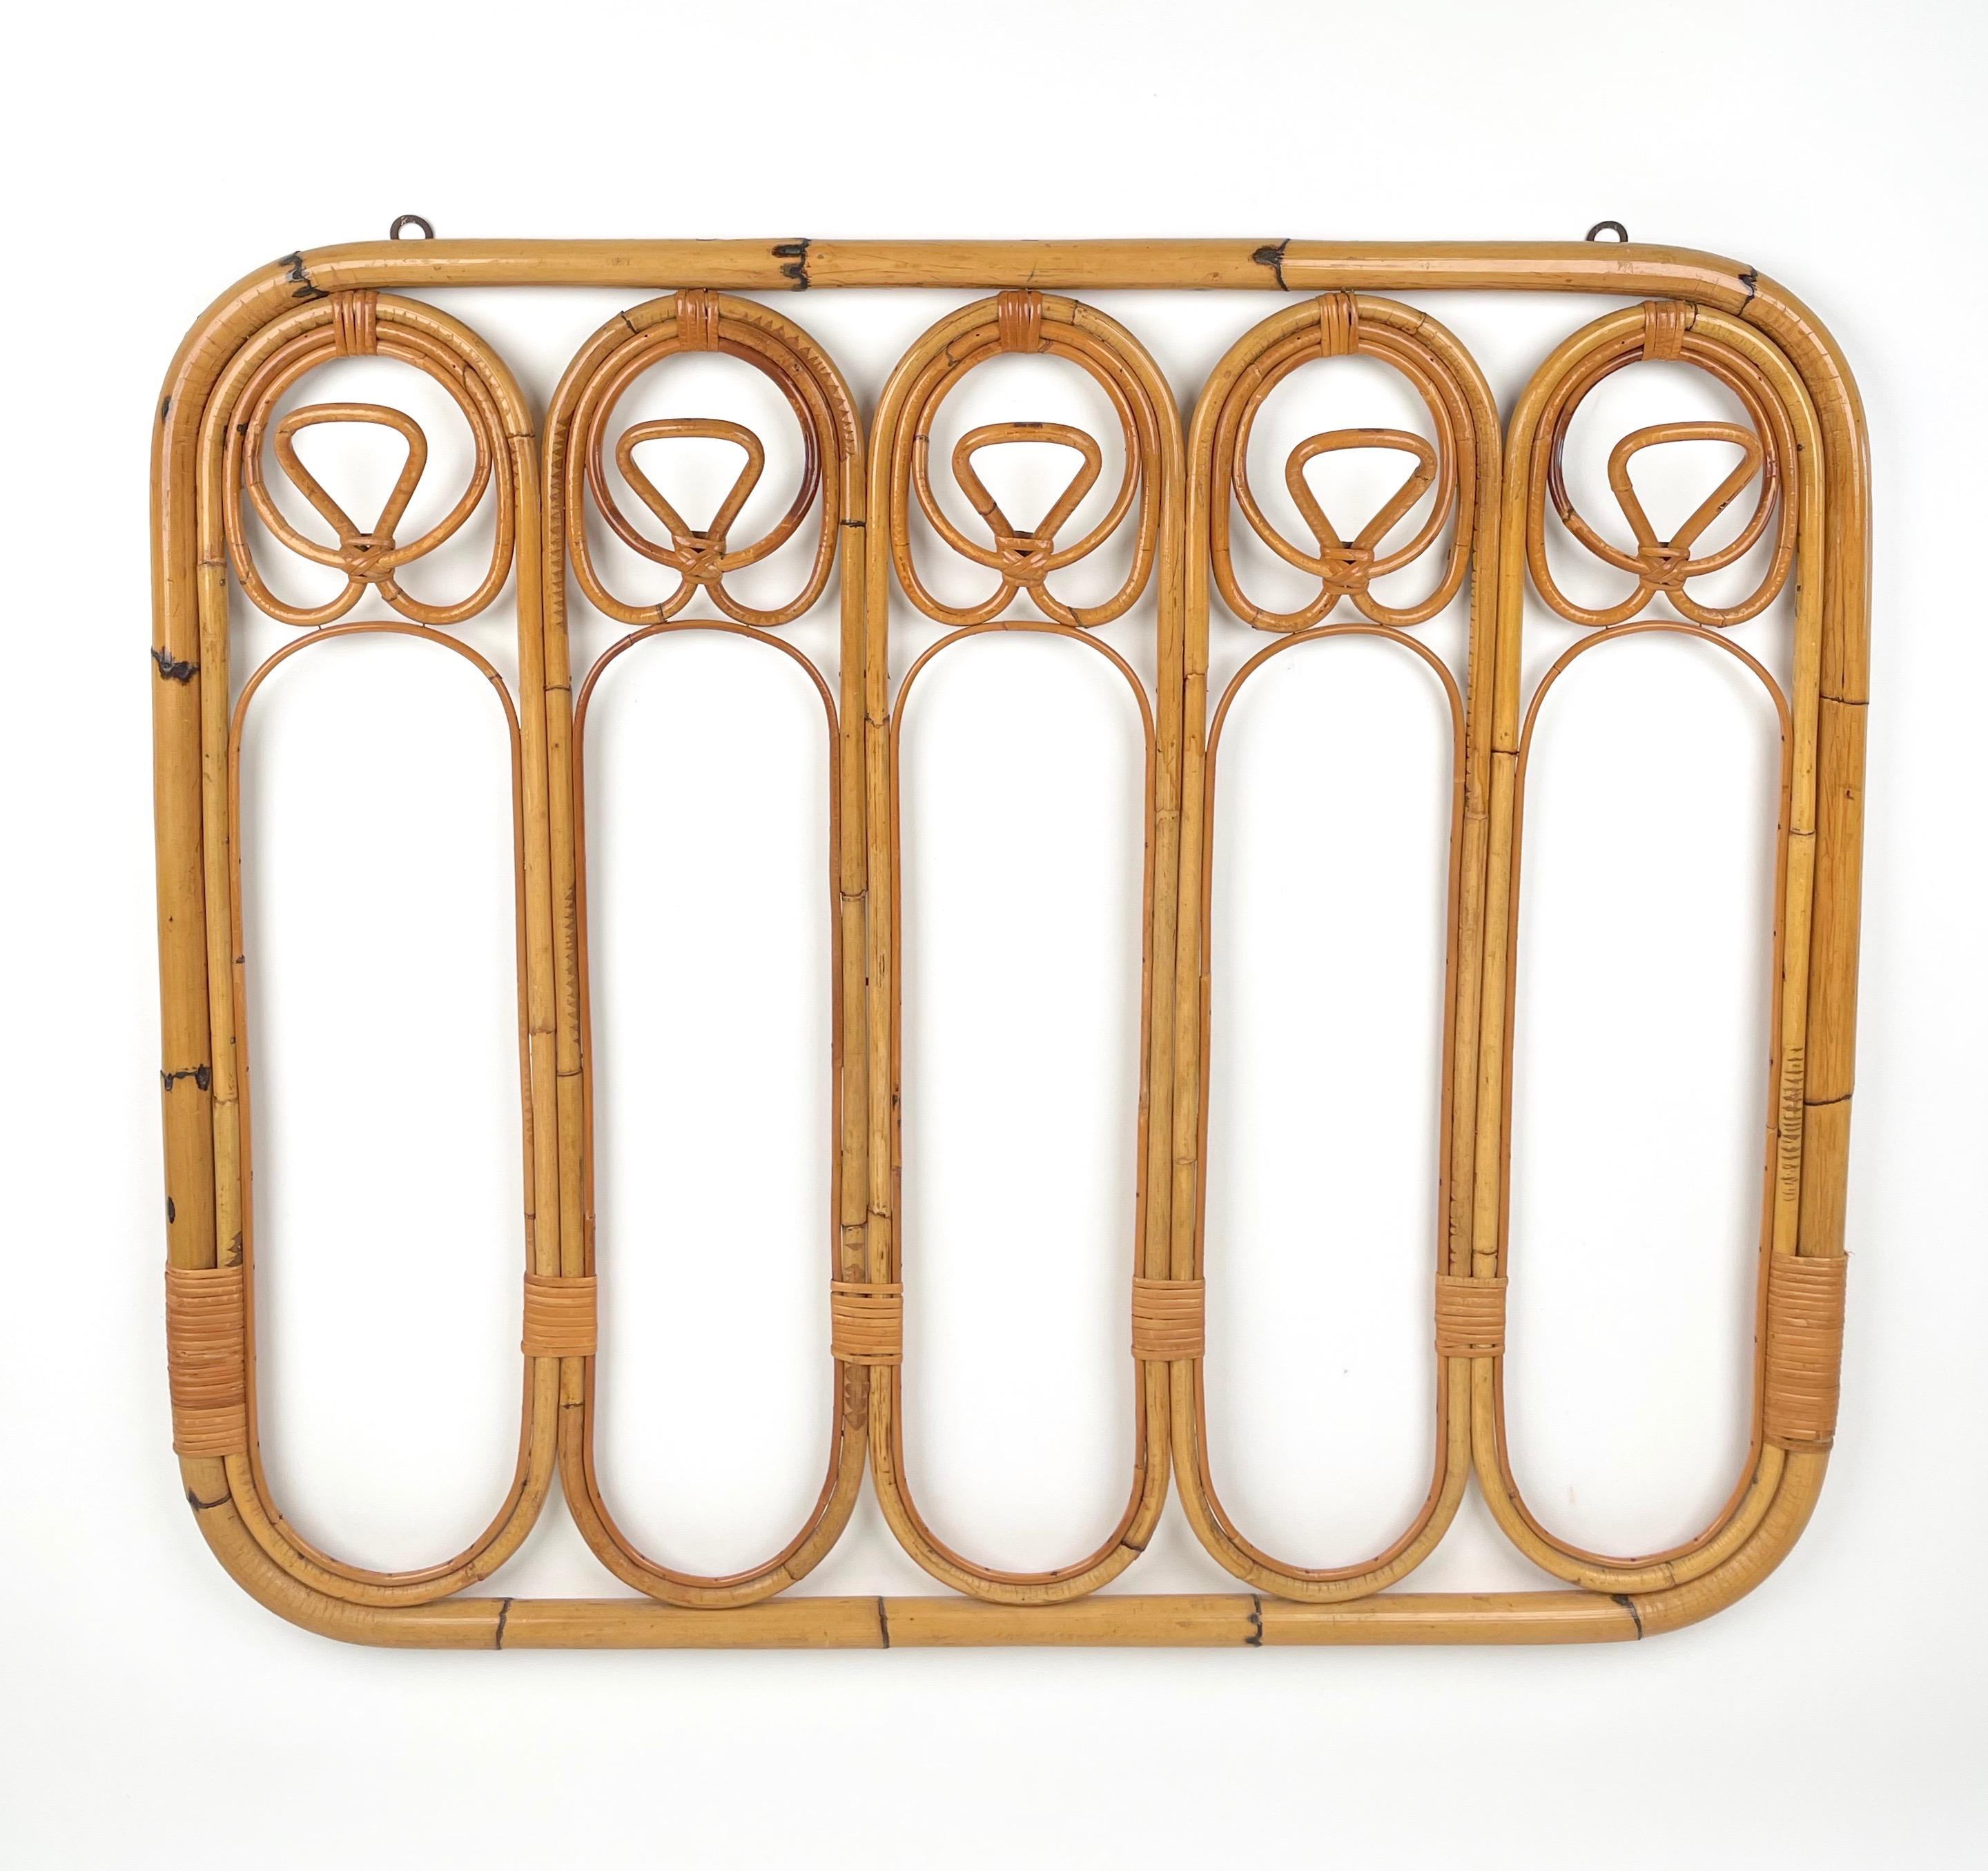 Big rectangular coat hanger with rounded corners in bamboo and rattan featuring five hooks. 

Made in Italy in the 1960s.